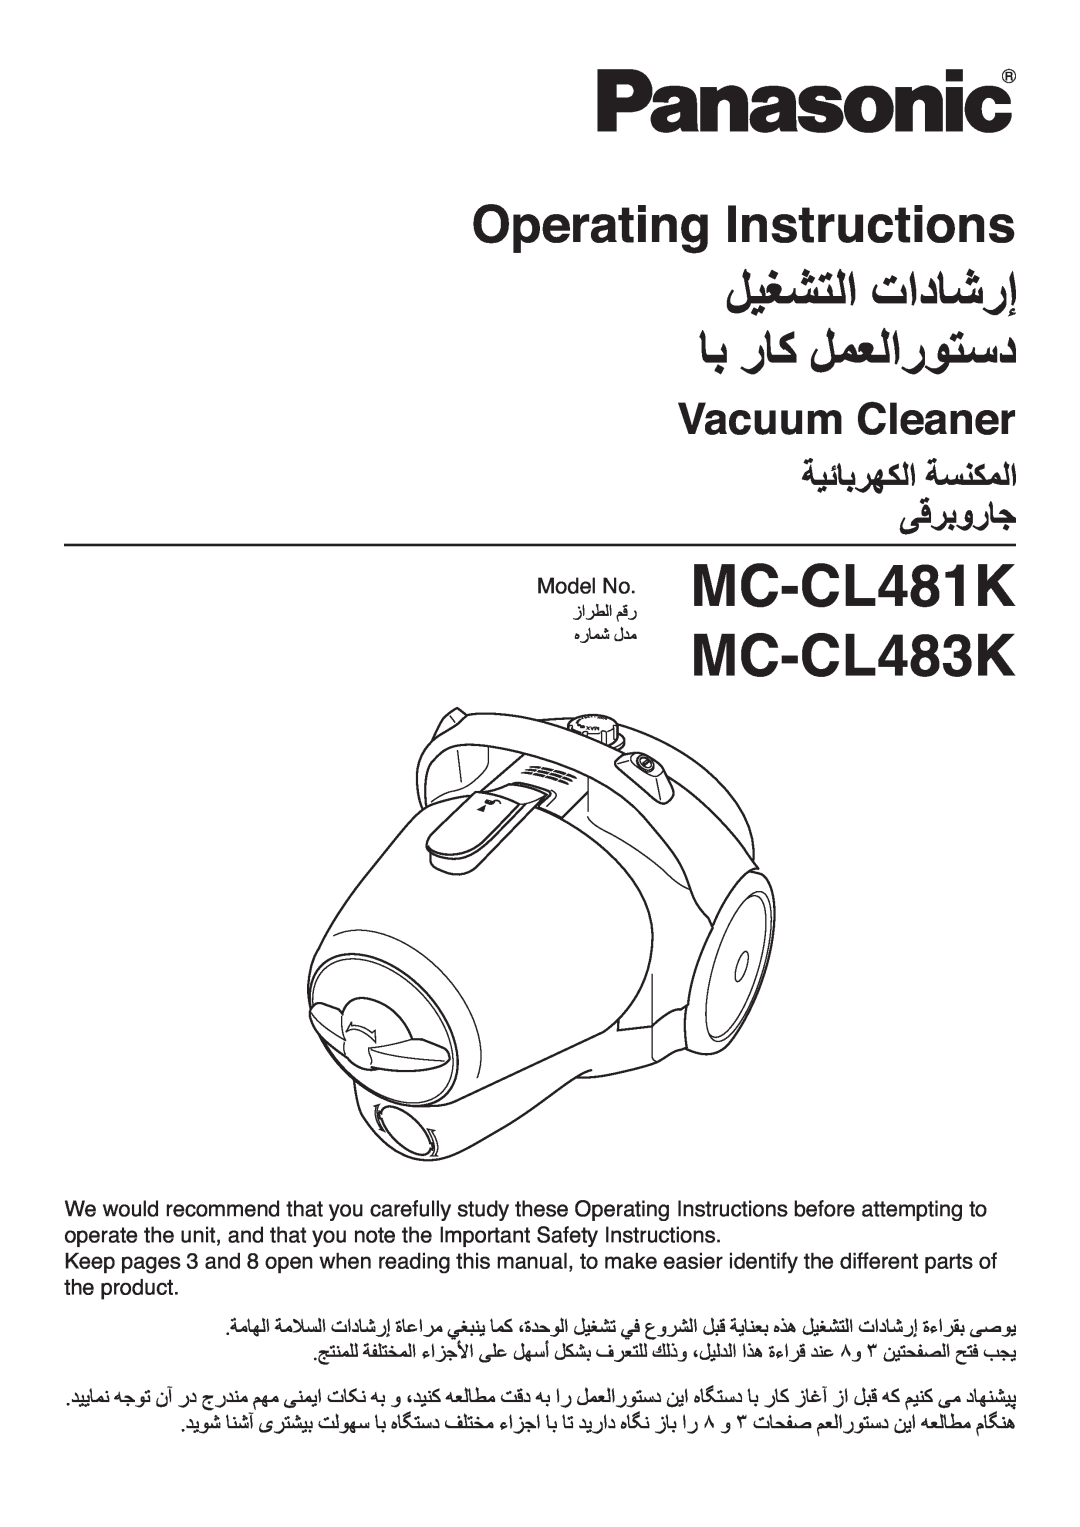 Panasonic MC-CL481K important safety instructions MC-CL483K, Operating Instructions, Vacuum Cleaner 